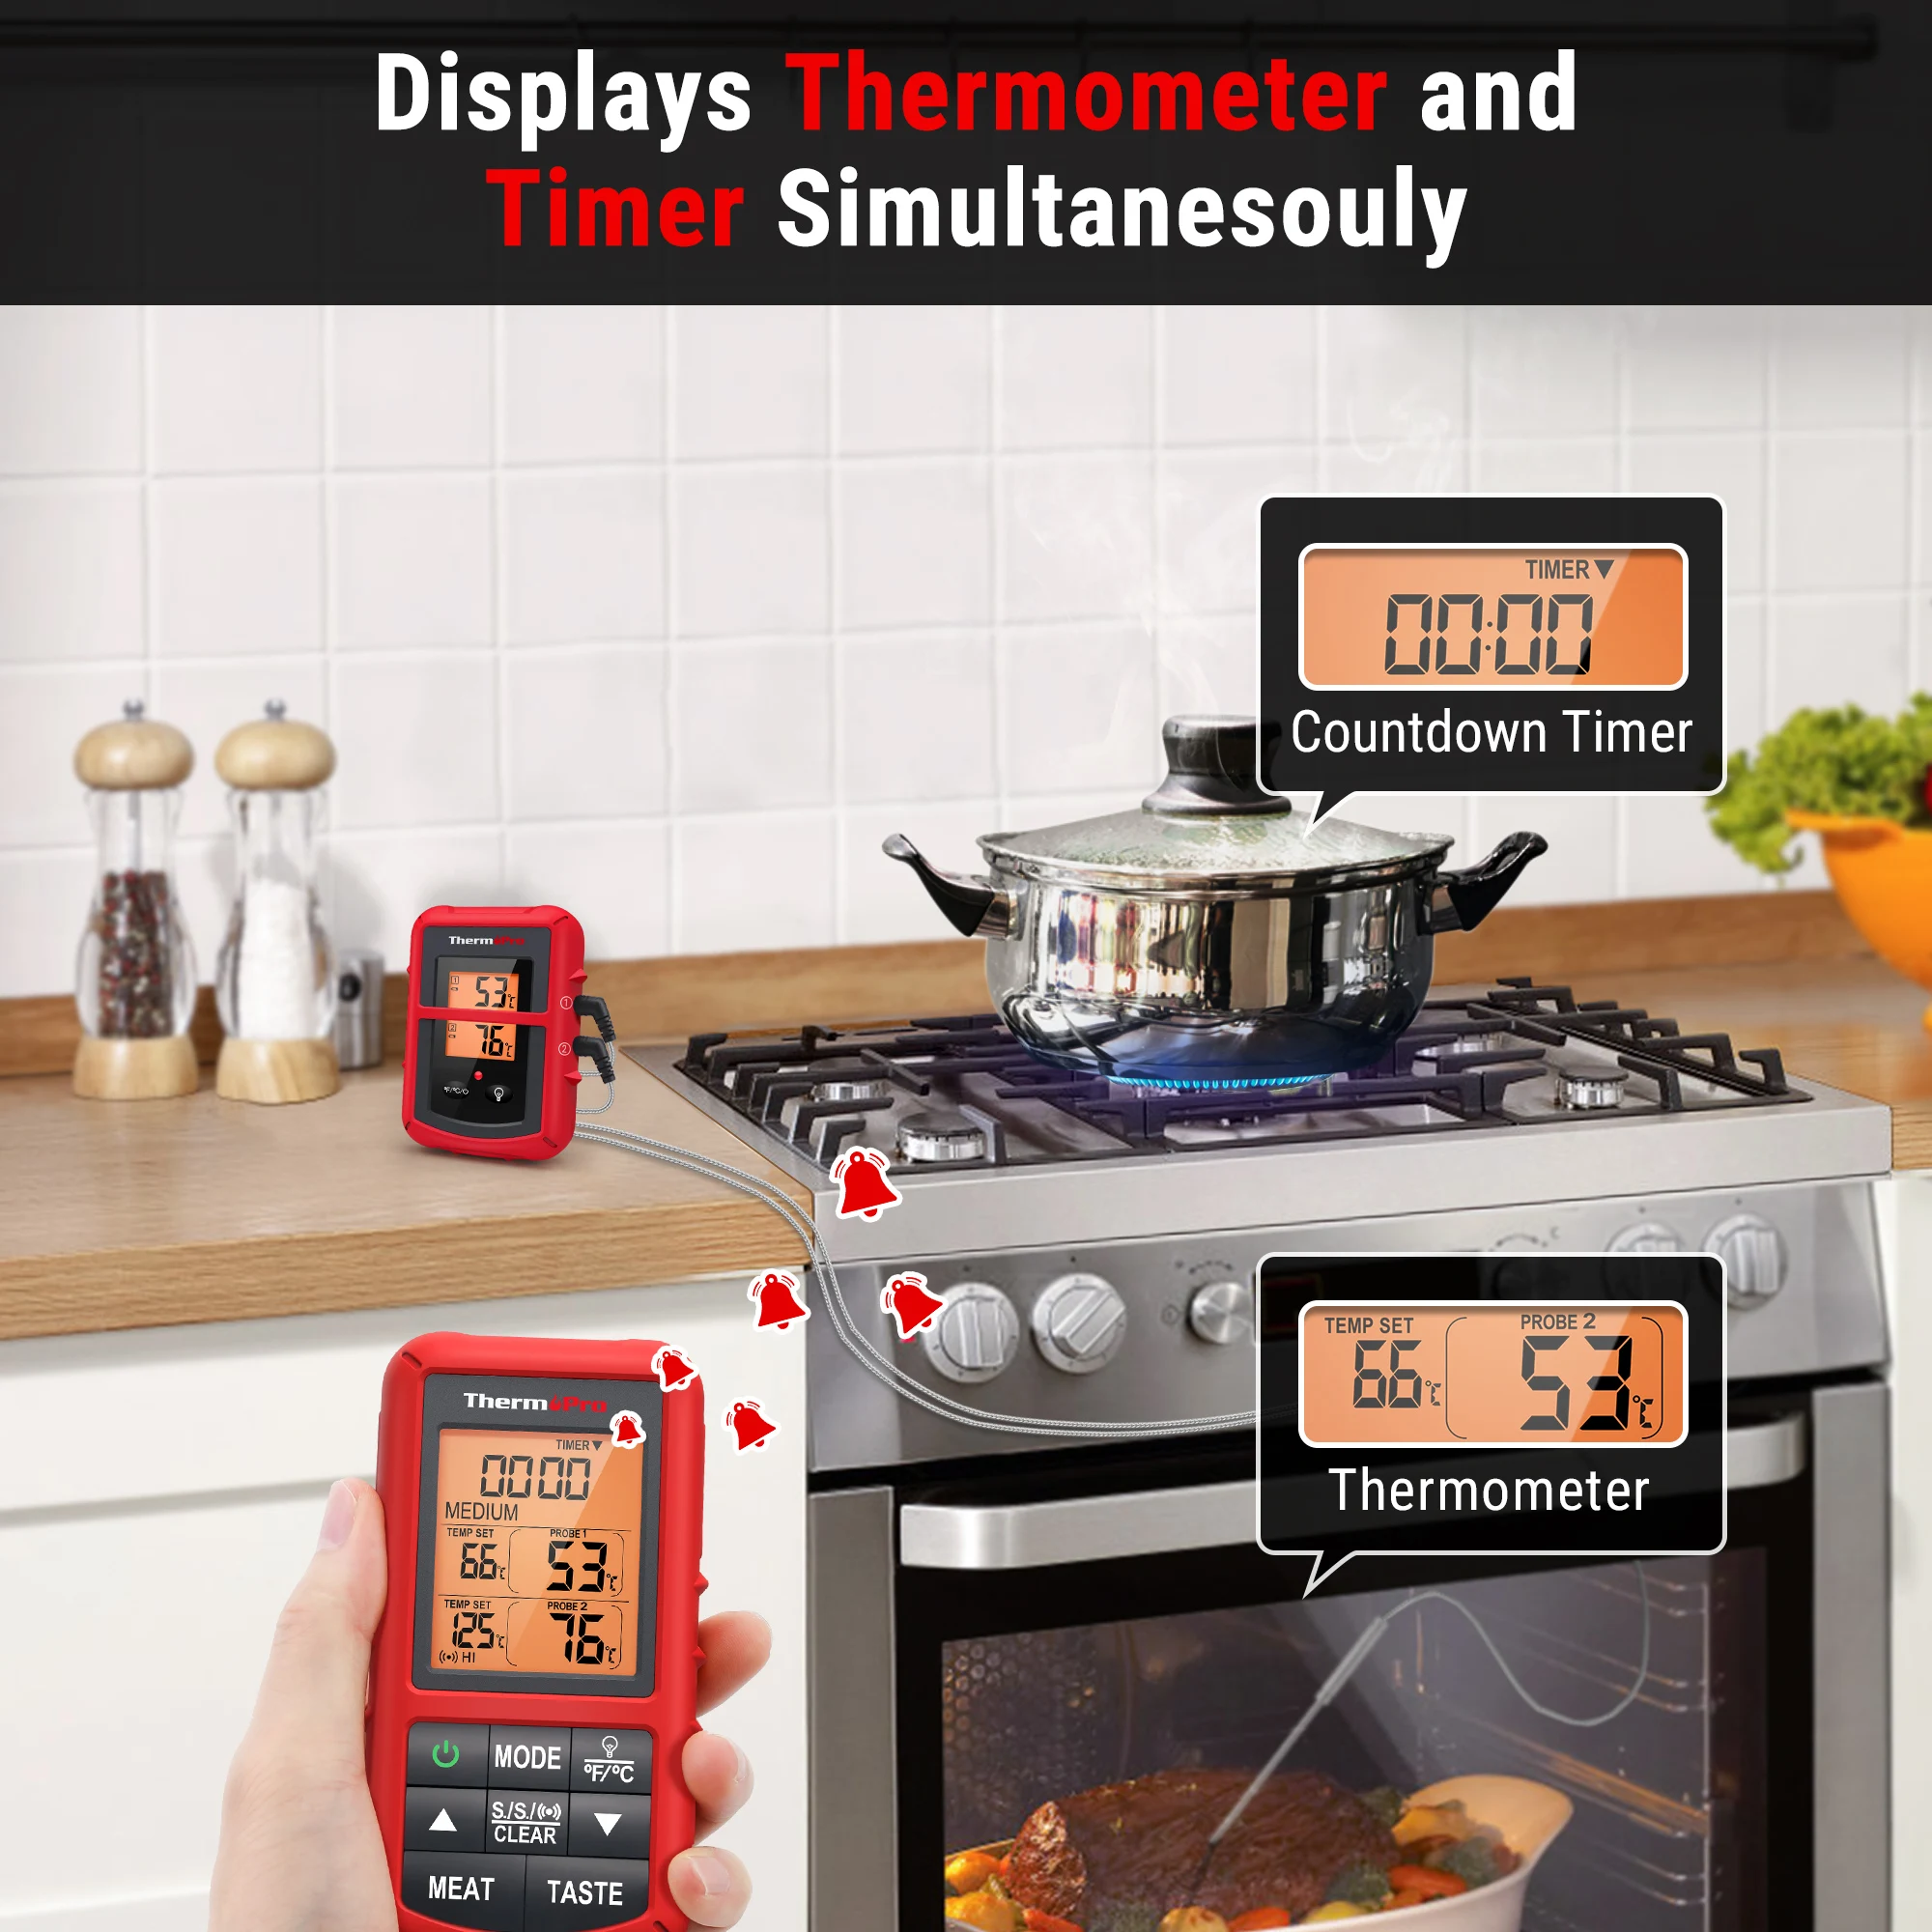 ThermoPro TP20C Wireless 150M Backlight LCD Display Digital Kitchen Cooking BBQ Oven Meat Thermometer With Timer Function